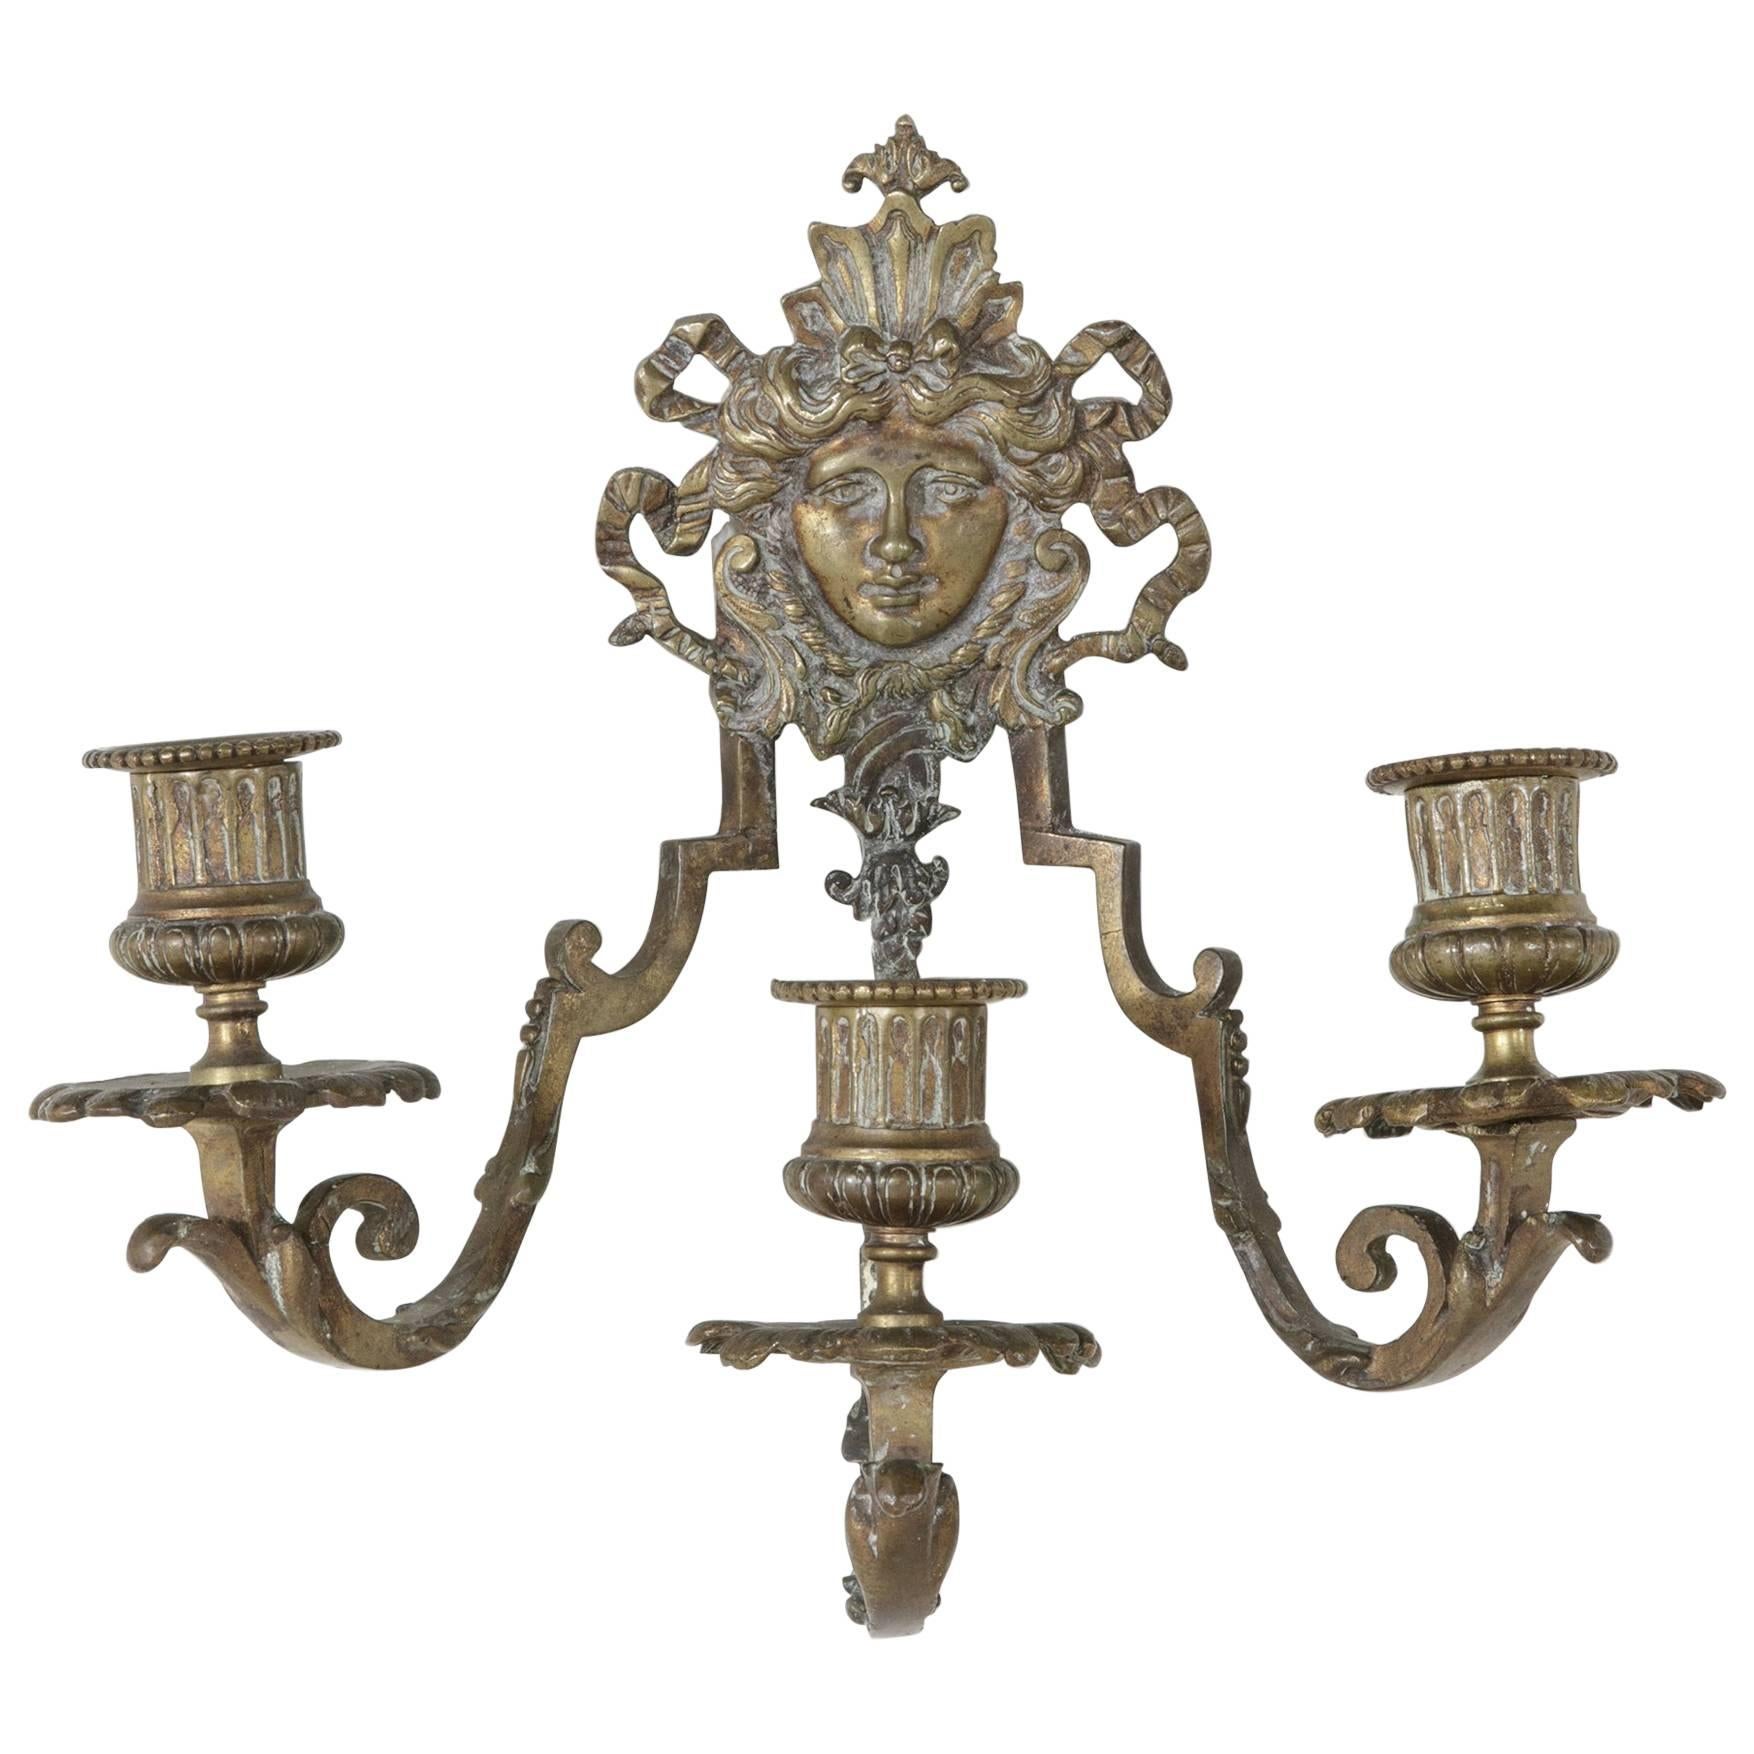 19th Century Napoleon III Period Bronze Candle Sconce with Female Face